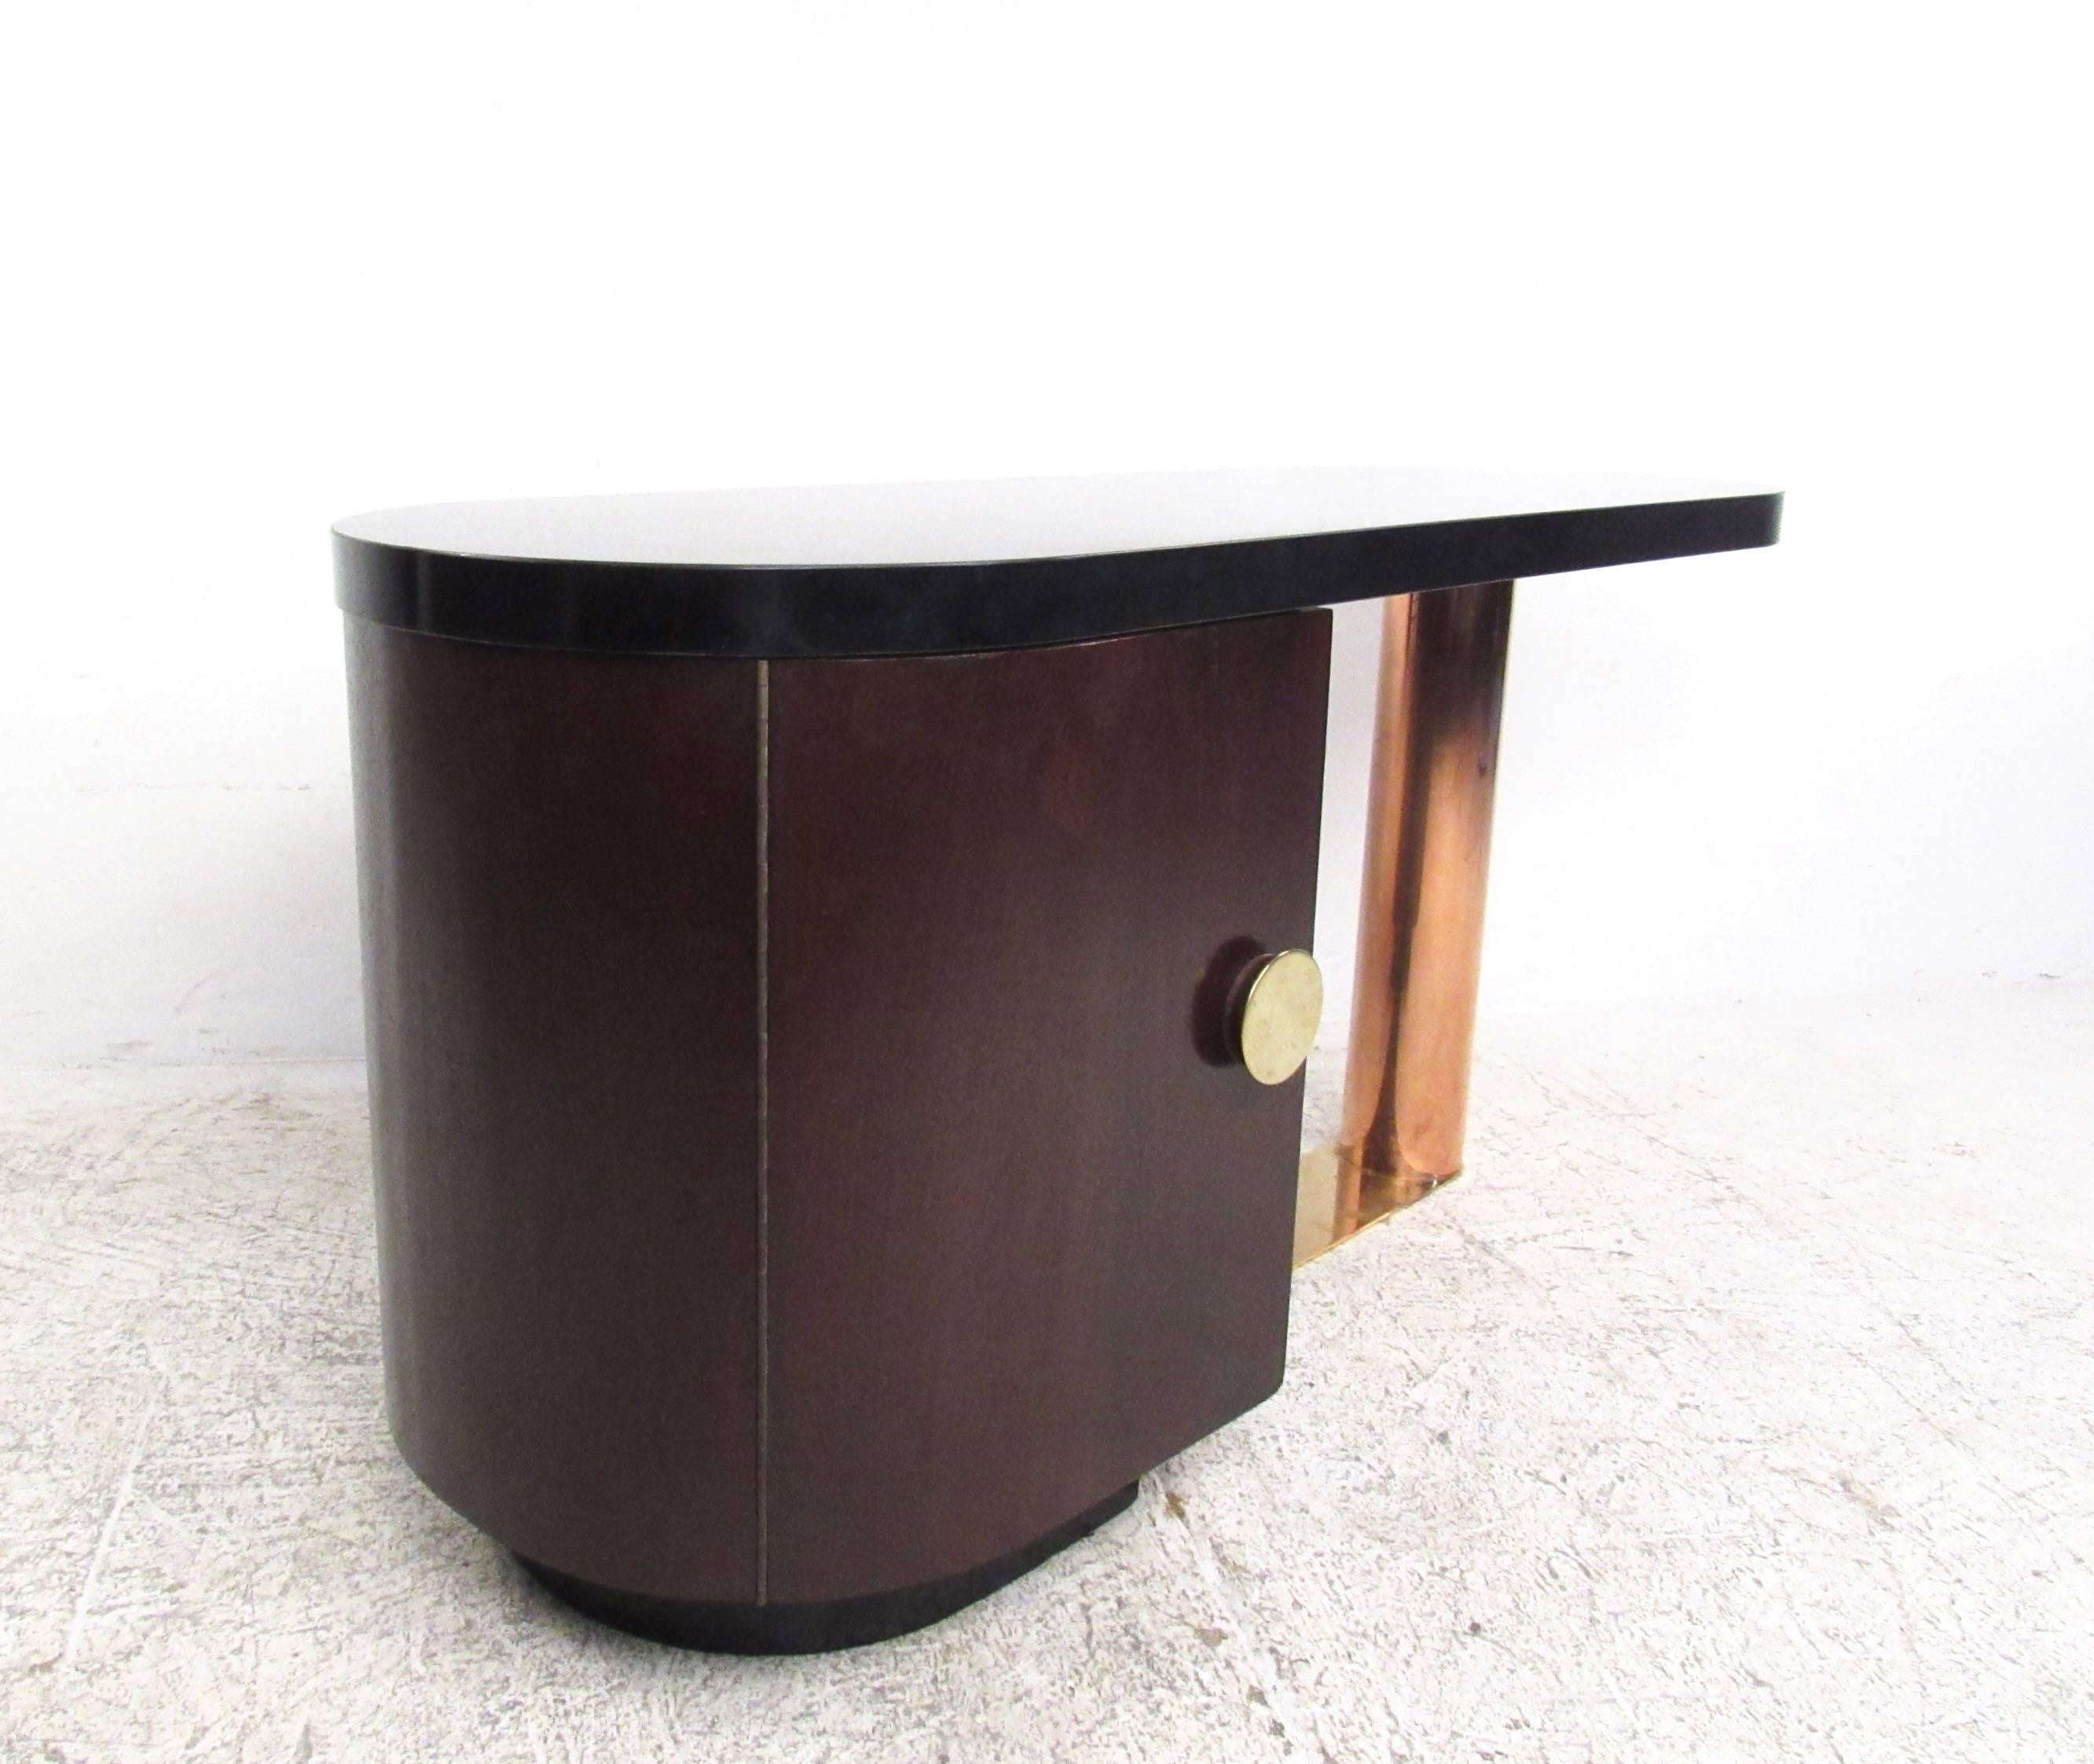 This unique vintage desk features dual pedestal construction in a lovely mixture of copper, brass, and wood construction. Storage cabinet offers added drawers for convenient storage, while unique door pull accents the Mid-Century Modern charm of the